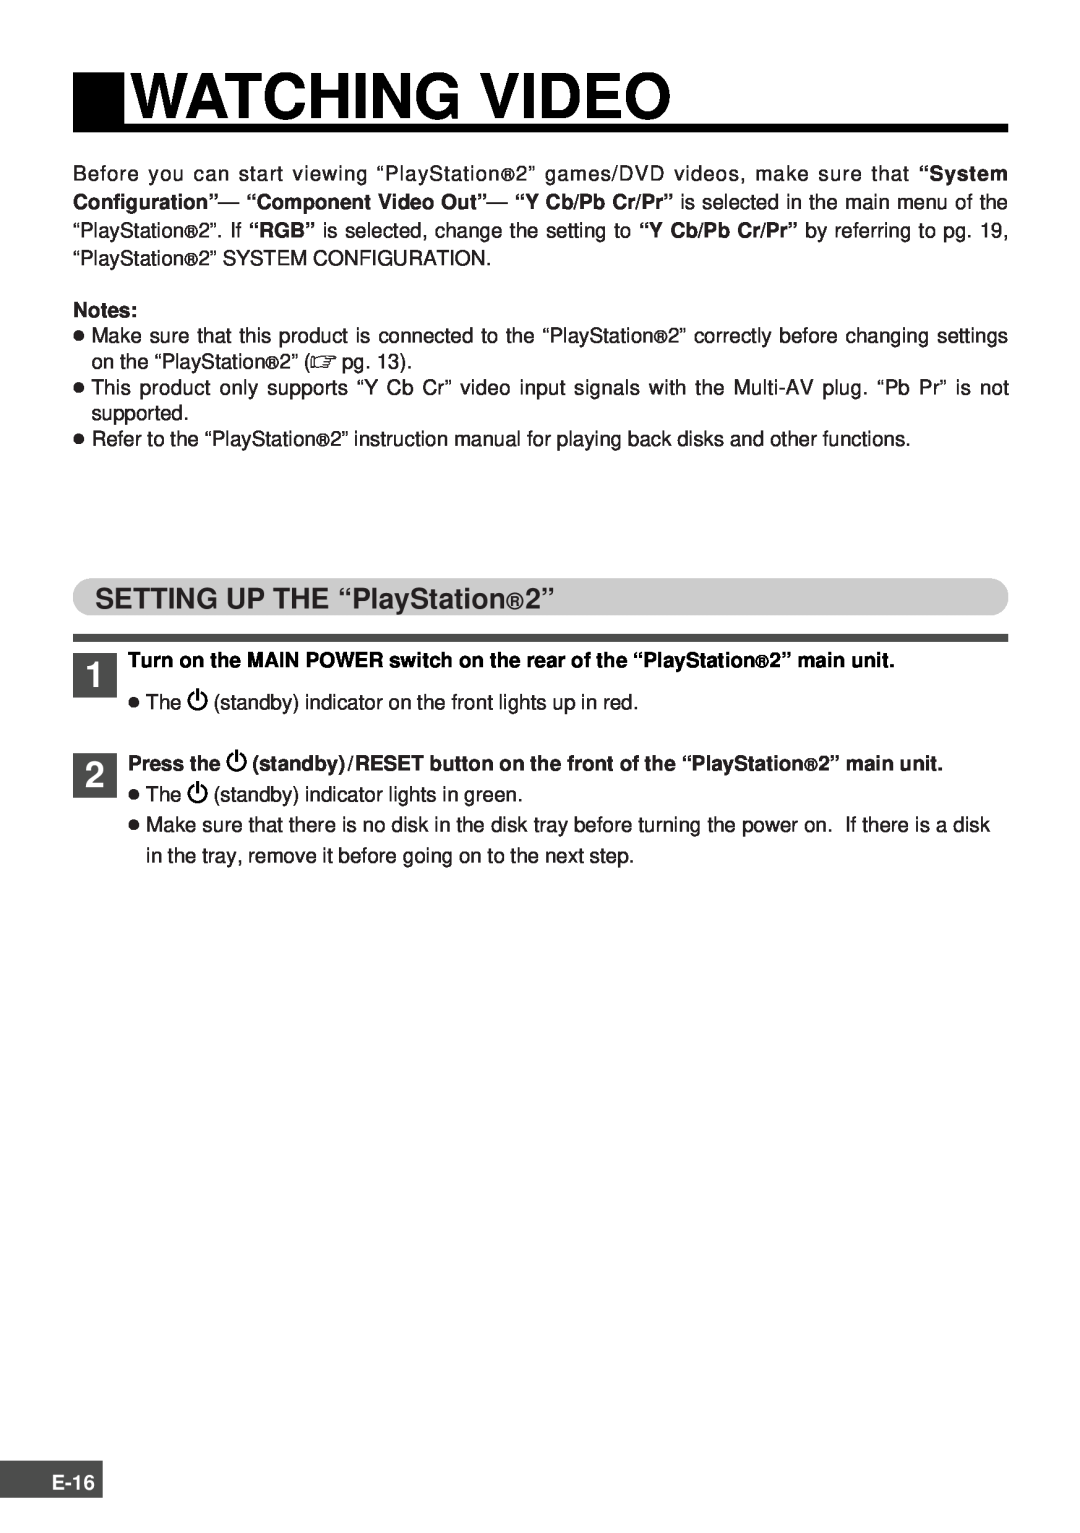 Olympus SCPH-10130U instruction manual Watching Video, SETTING UP THE “PlayStation 2”, E-16 